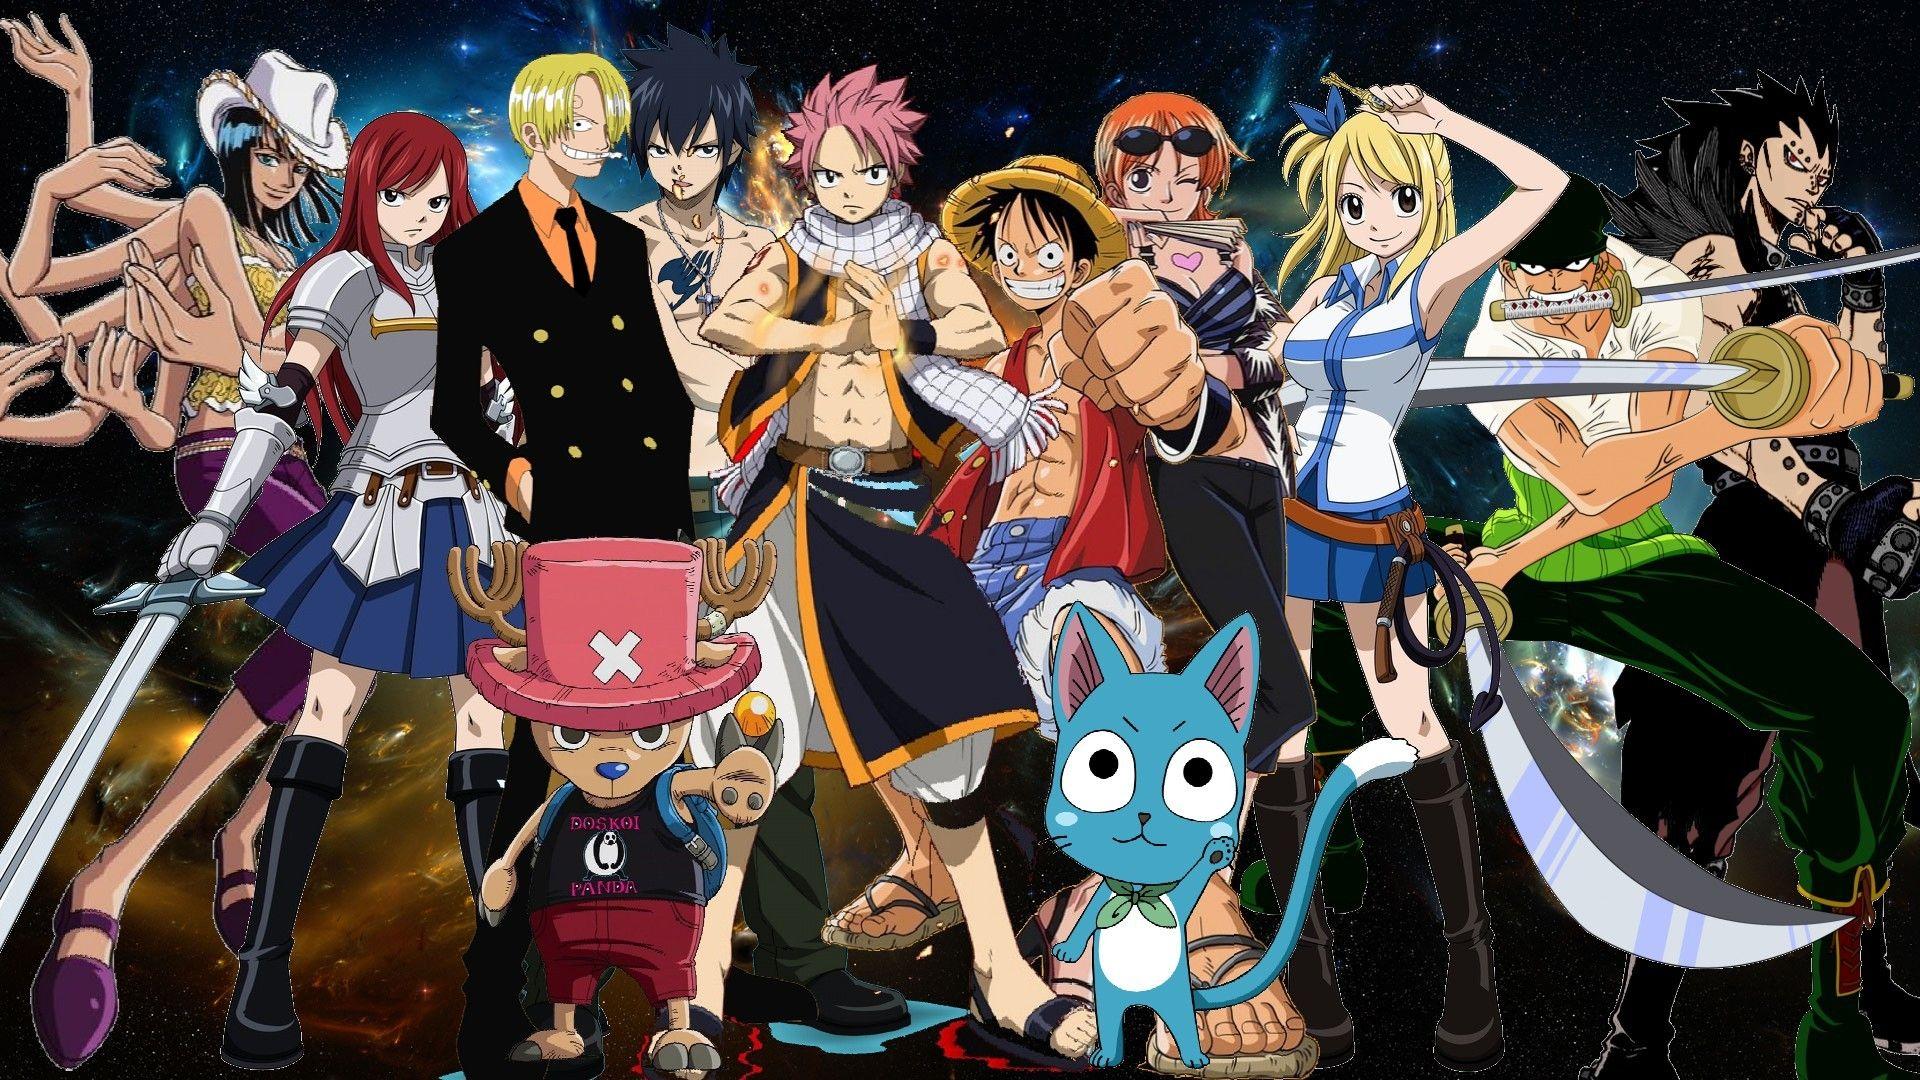 Fairy Tail Wallpaper HD for PC or Mobile Page of Anime 1920x1080